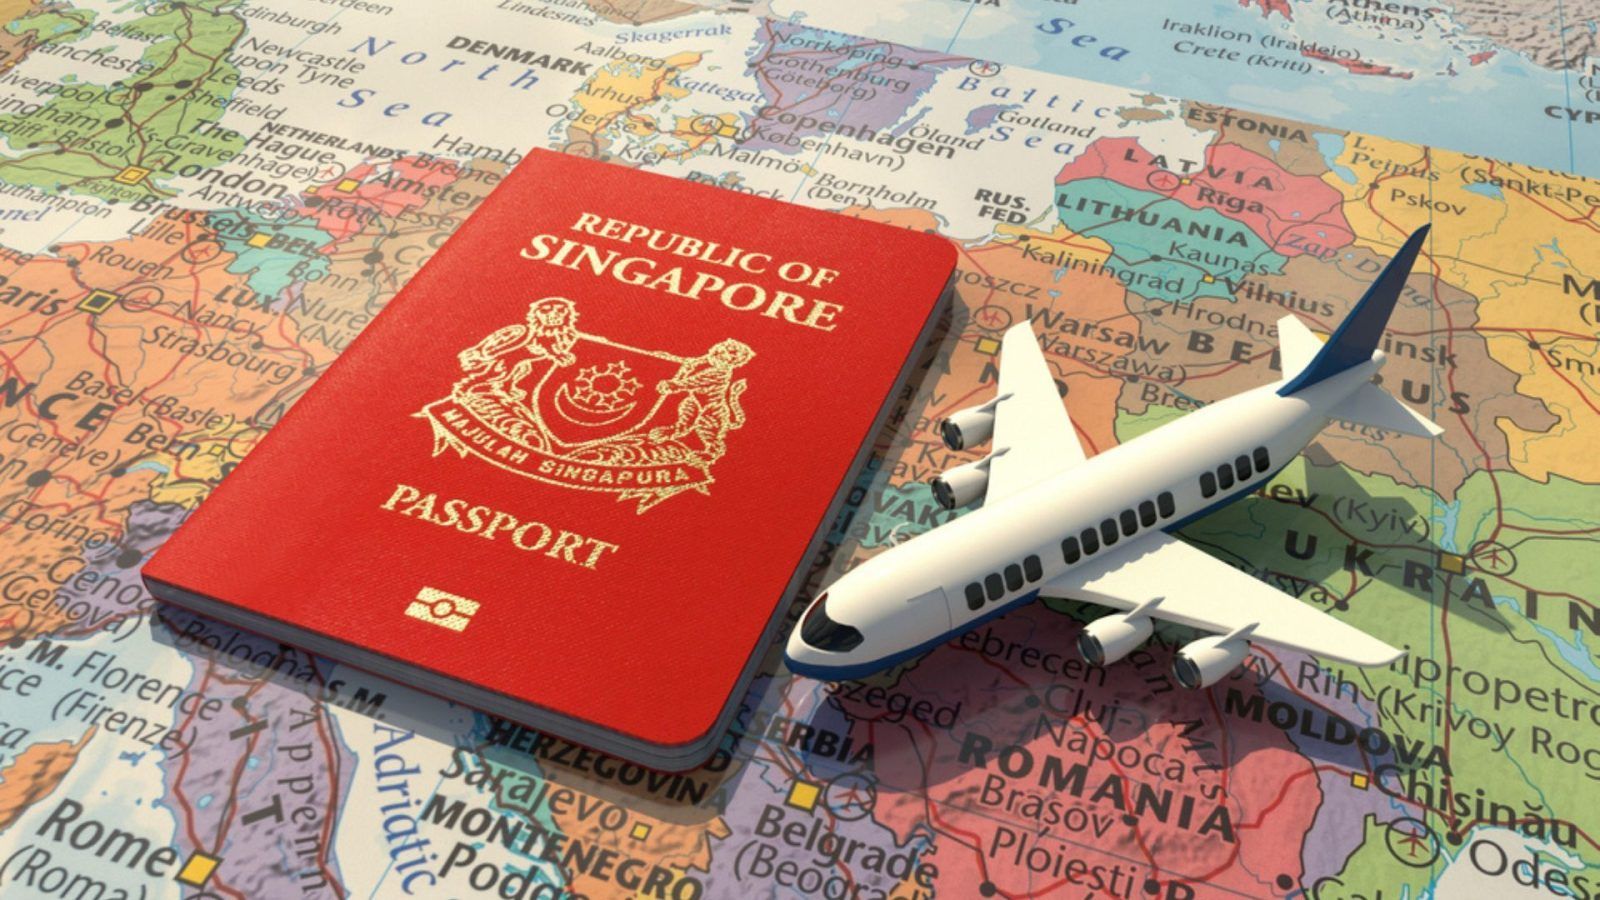 Henley Passport Index: Singapore Tops List, India At 80th Spot